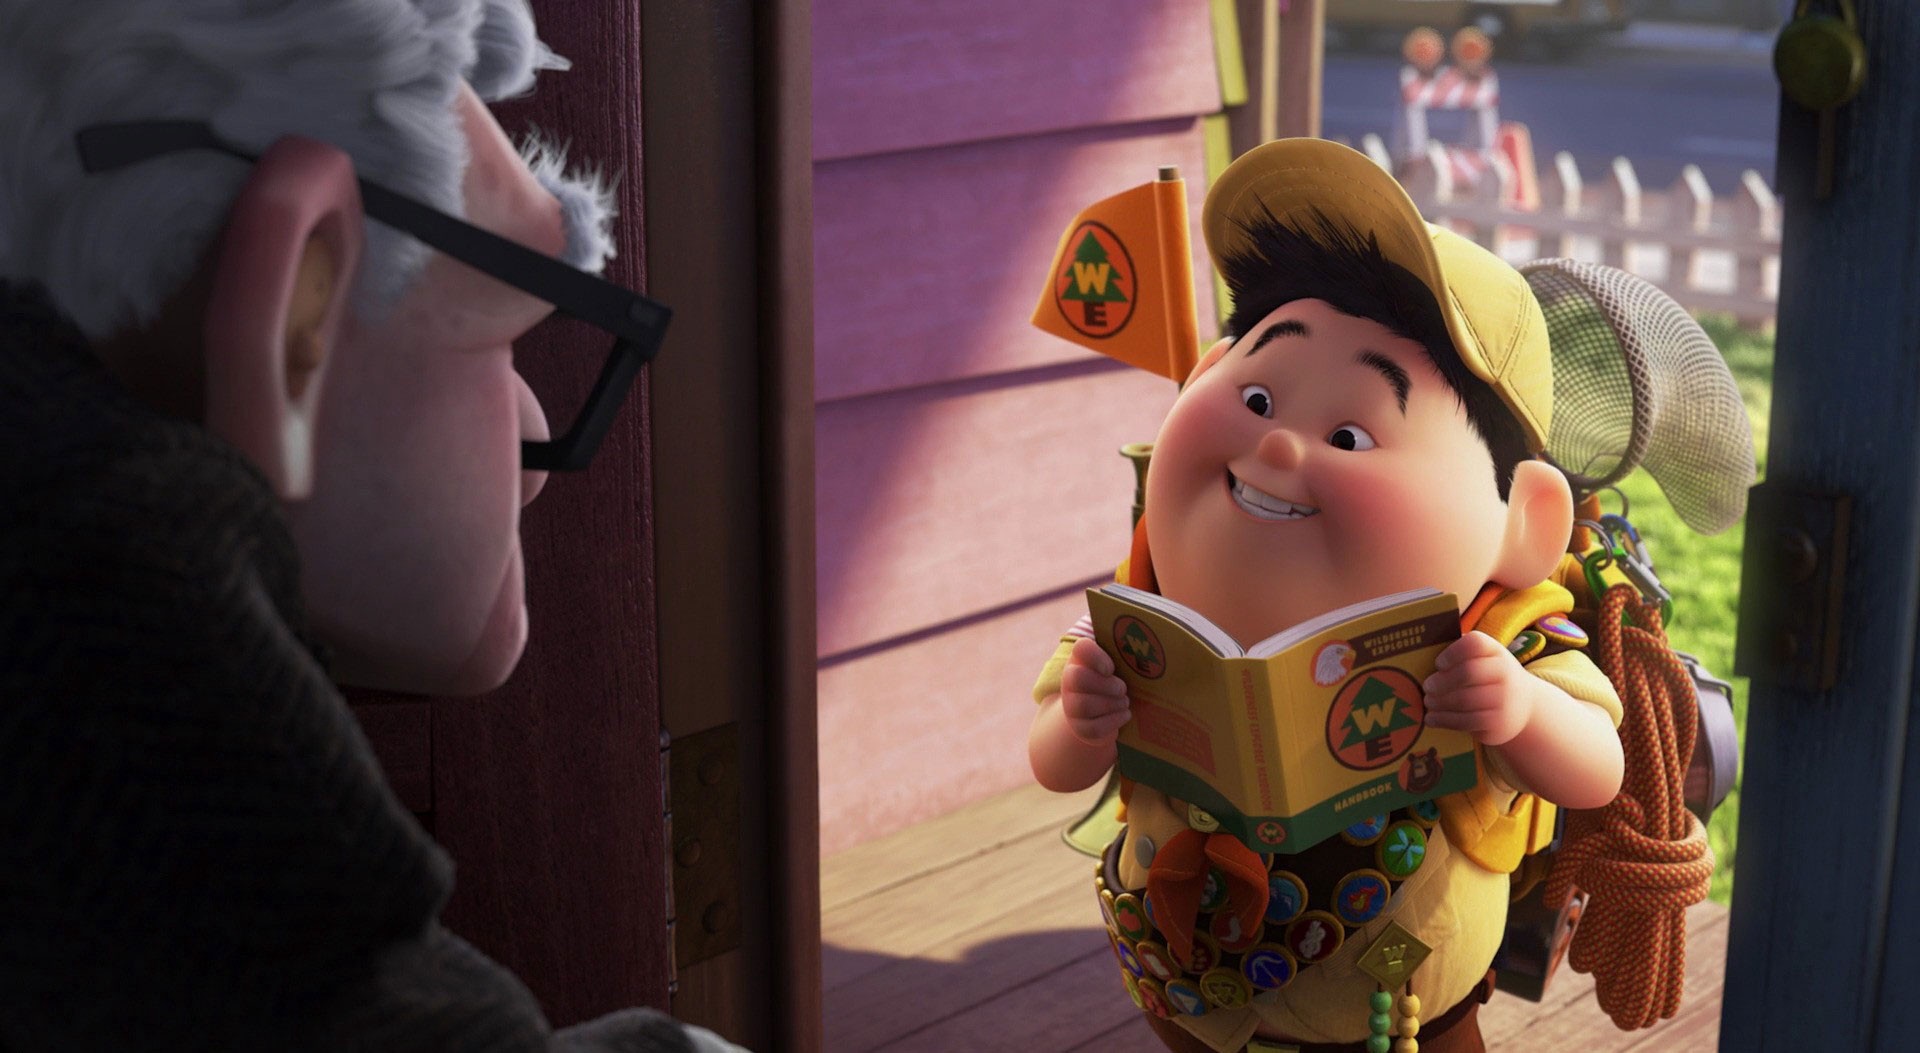 Russell, a young boy, stands in Carl's doorstep. He wears a yellow Boy Scouts-style uniform and reads aloud from a book.